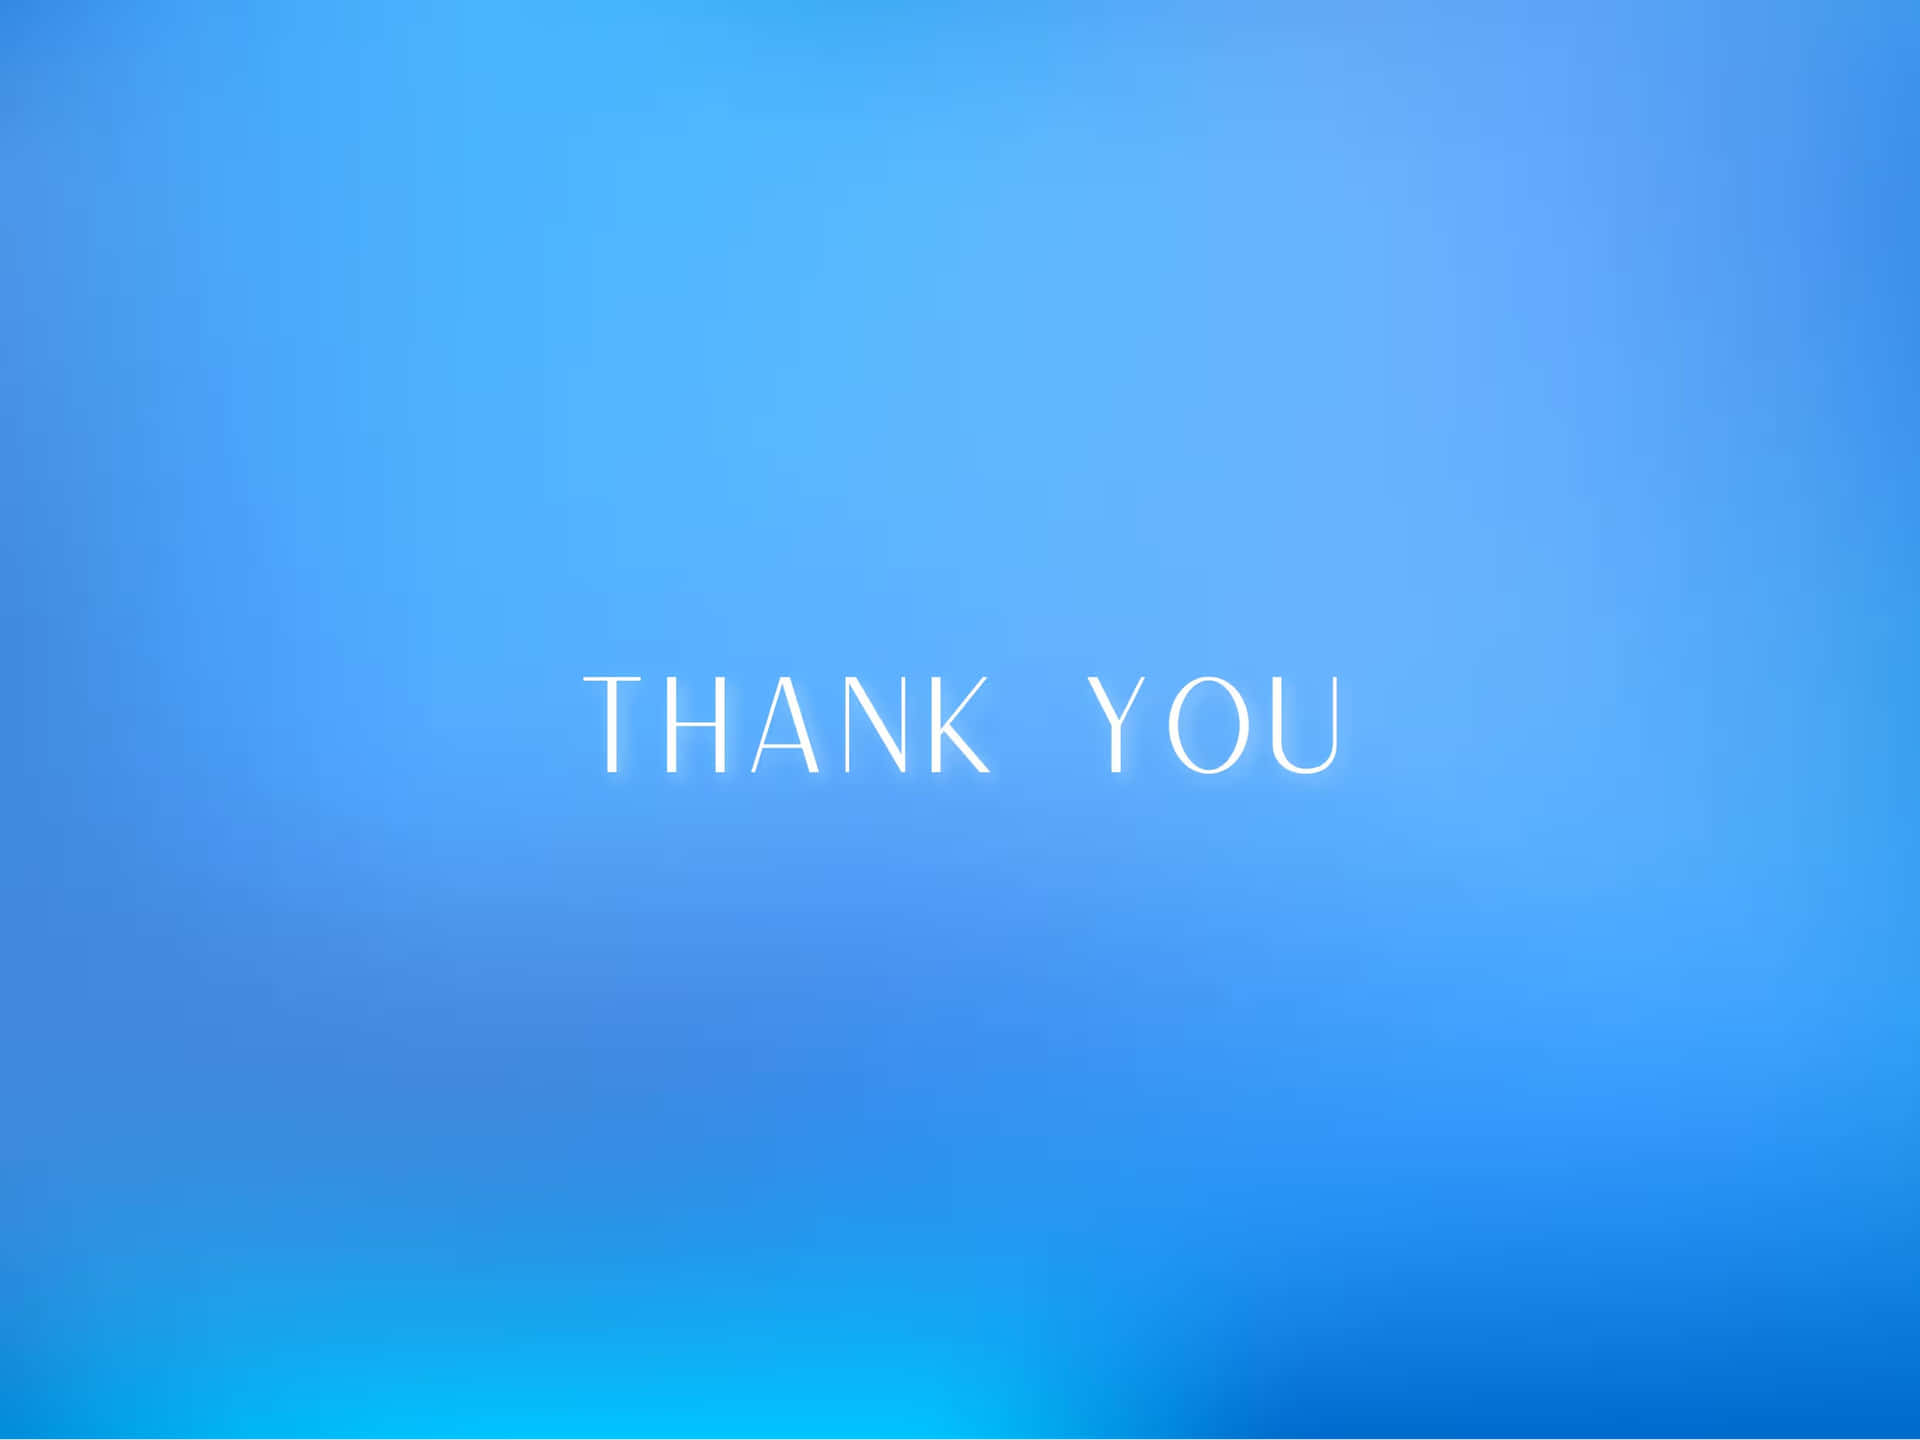 Thank You Blue Gradient Background Wallpaper